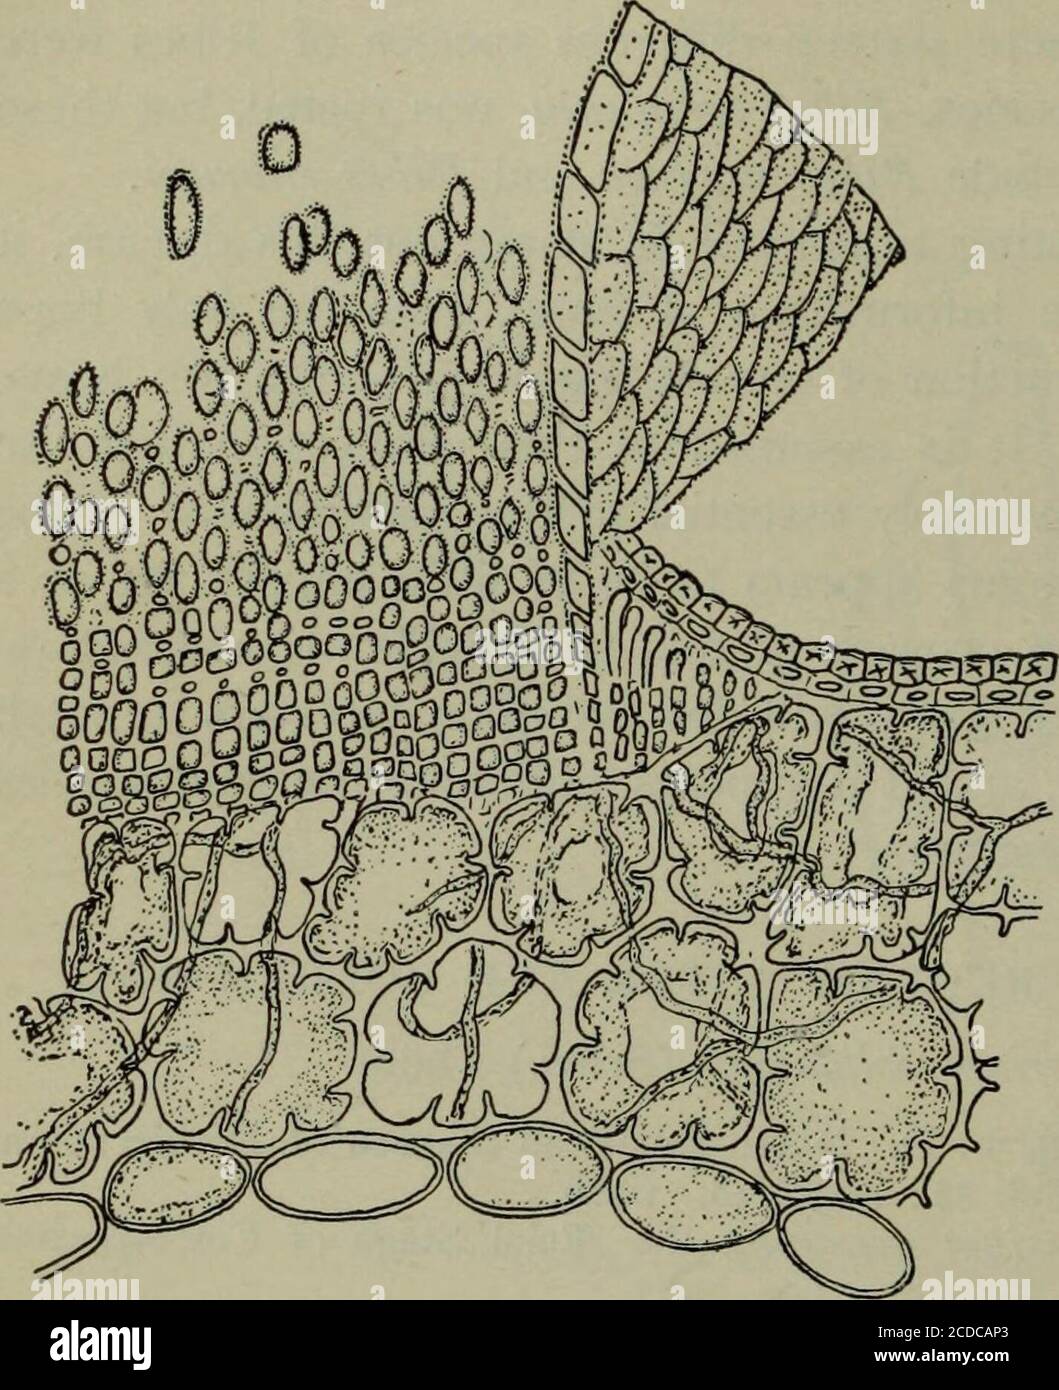 . Fungous diseases of plants, with chapters on physiology, culture methods and technique . Exp. Sta. Rept. (1907): 369-396. pis. 23-32. Occurrence. Of the several species of Coleosporium havinguredospores and teleutospores on species of Compositae, there isnone of such common occurrence throughout North America asthe species here discussed. To this species are referred the orangerusts of many species of Aster and Solidago (golden-rod). It in-cludes also as hosts representatives of several other genera, amongwhich is the cultivated aster {CallistepJuis hortensis). This fungusis by many regarded Stock Photo